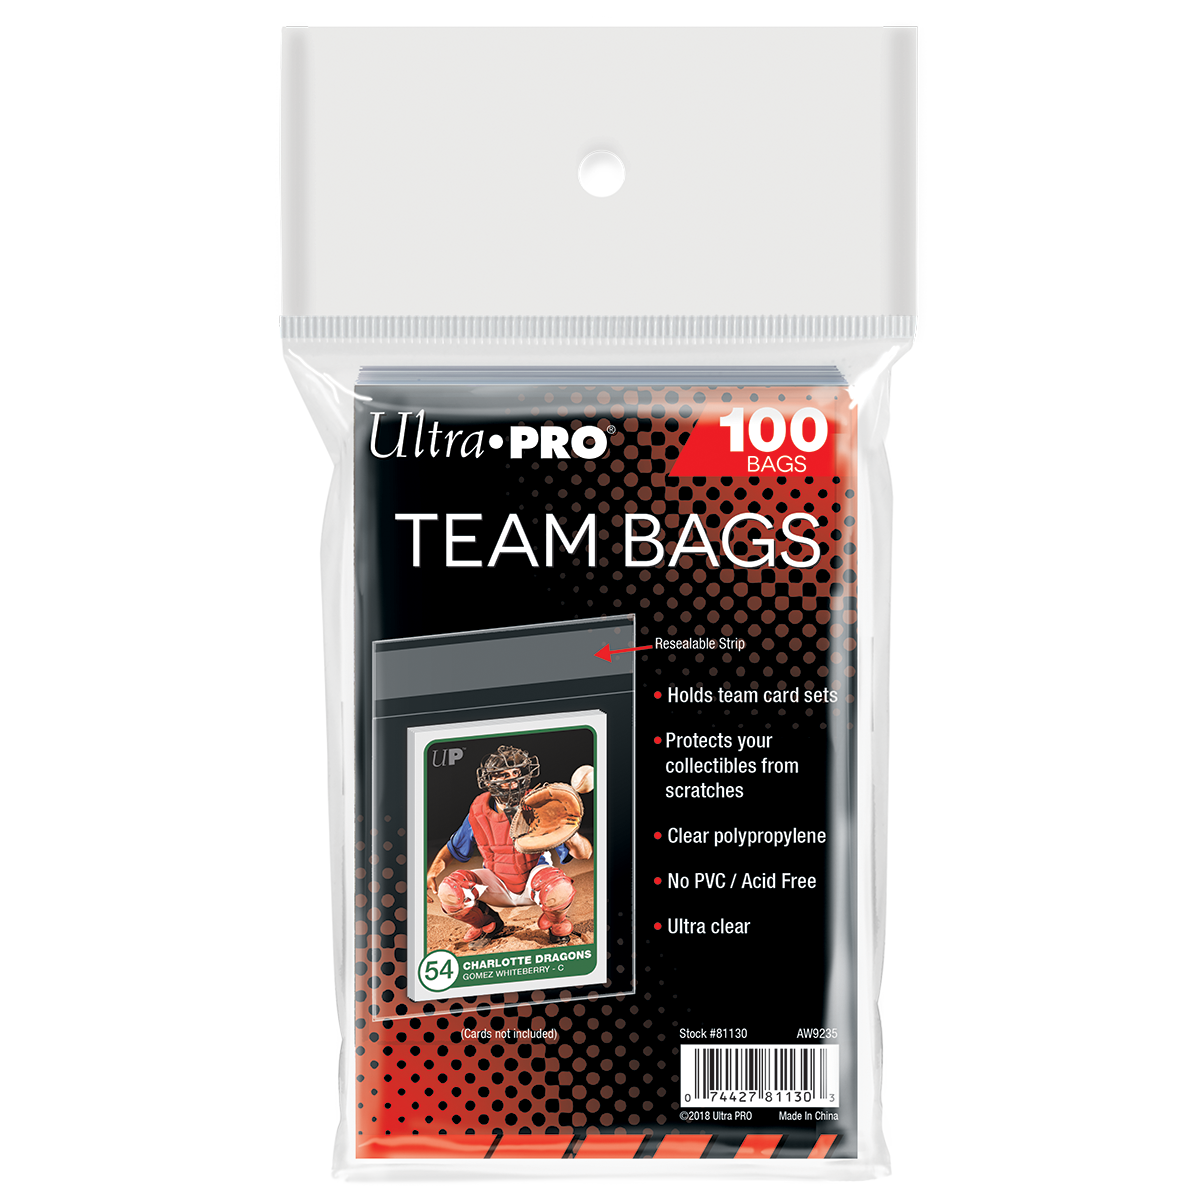 Resealable team bags for standard size trading cards